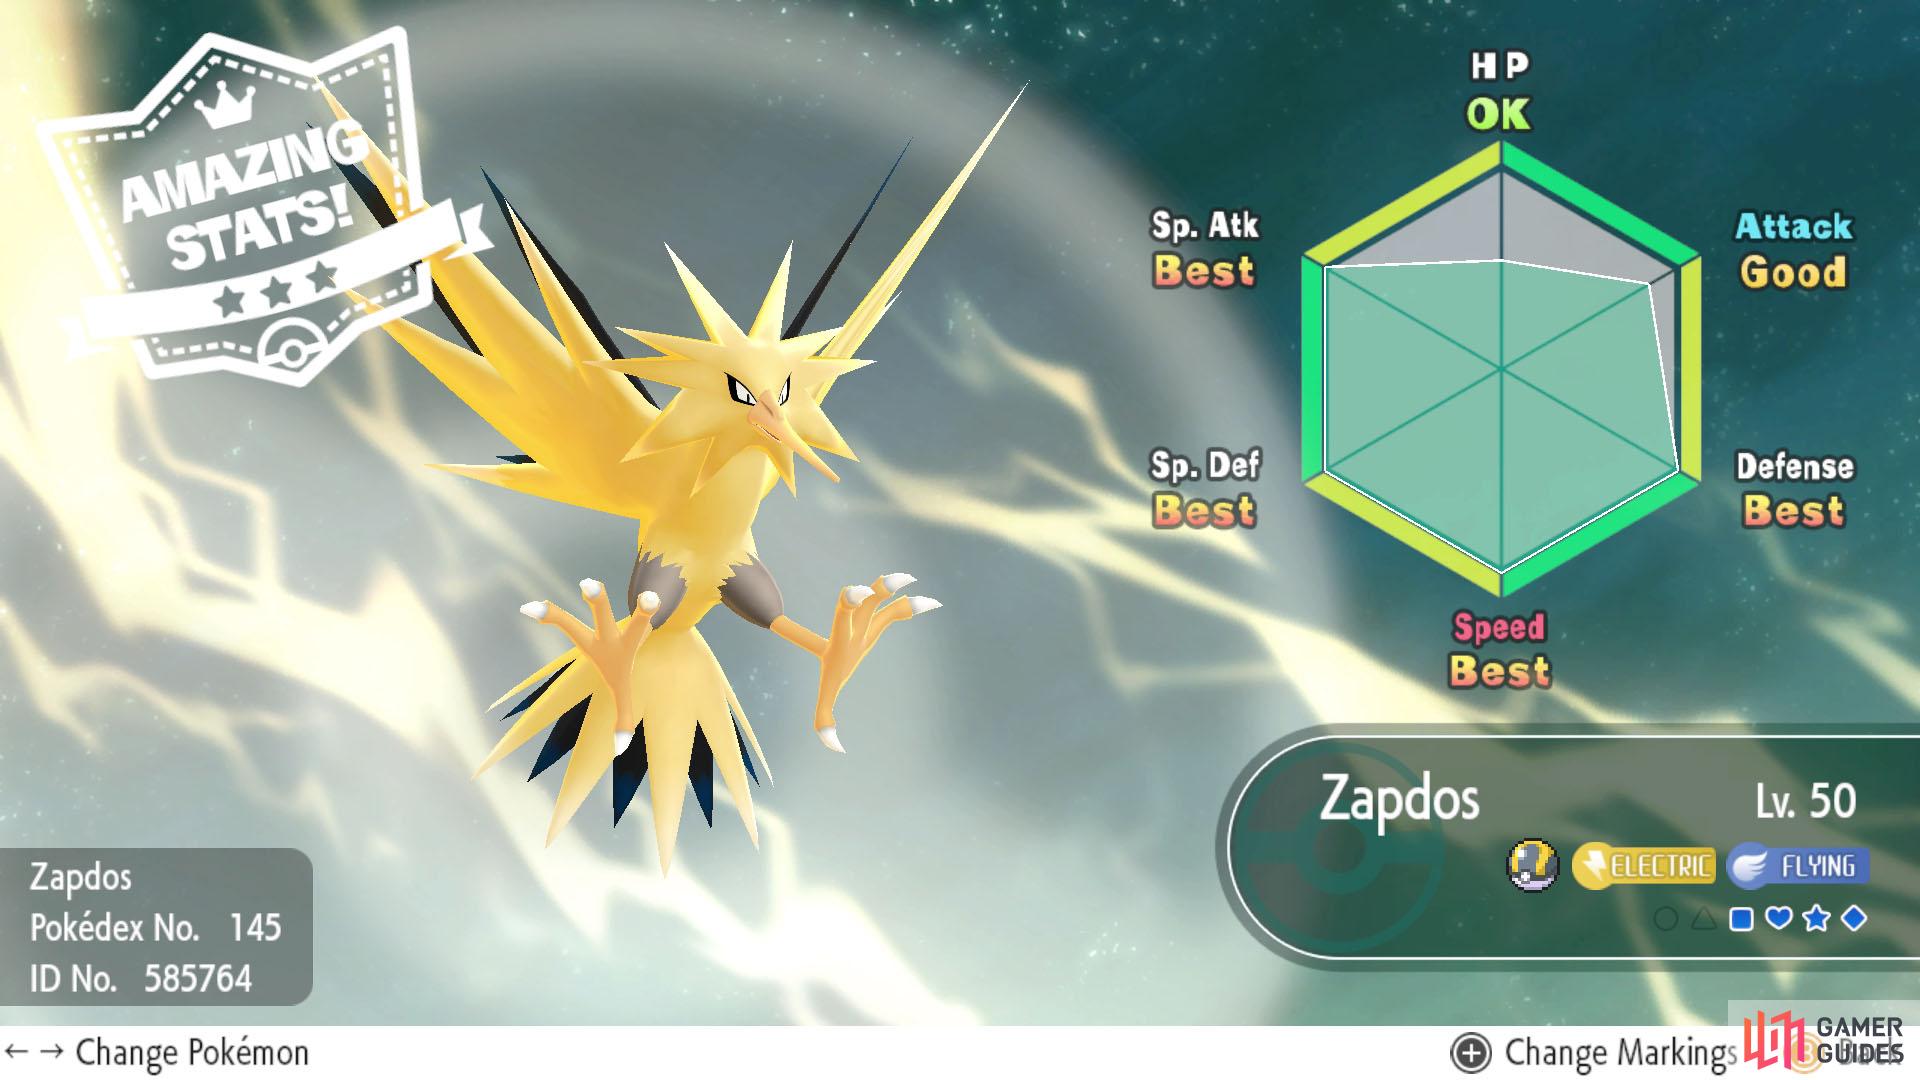 This Zapdos we caught has max IVs in four stats. Not too shabby!